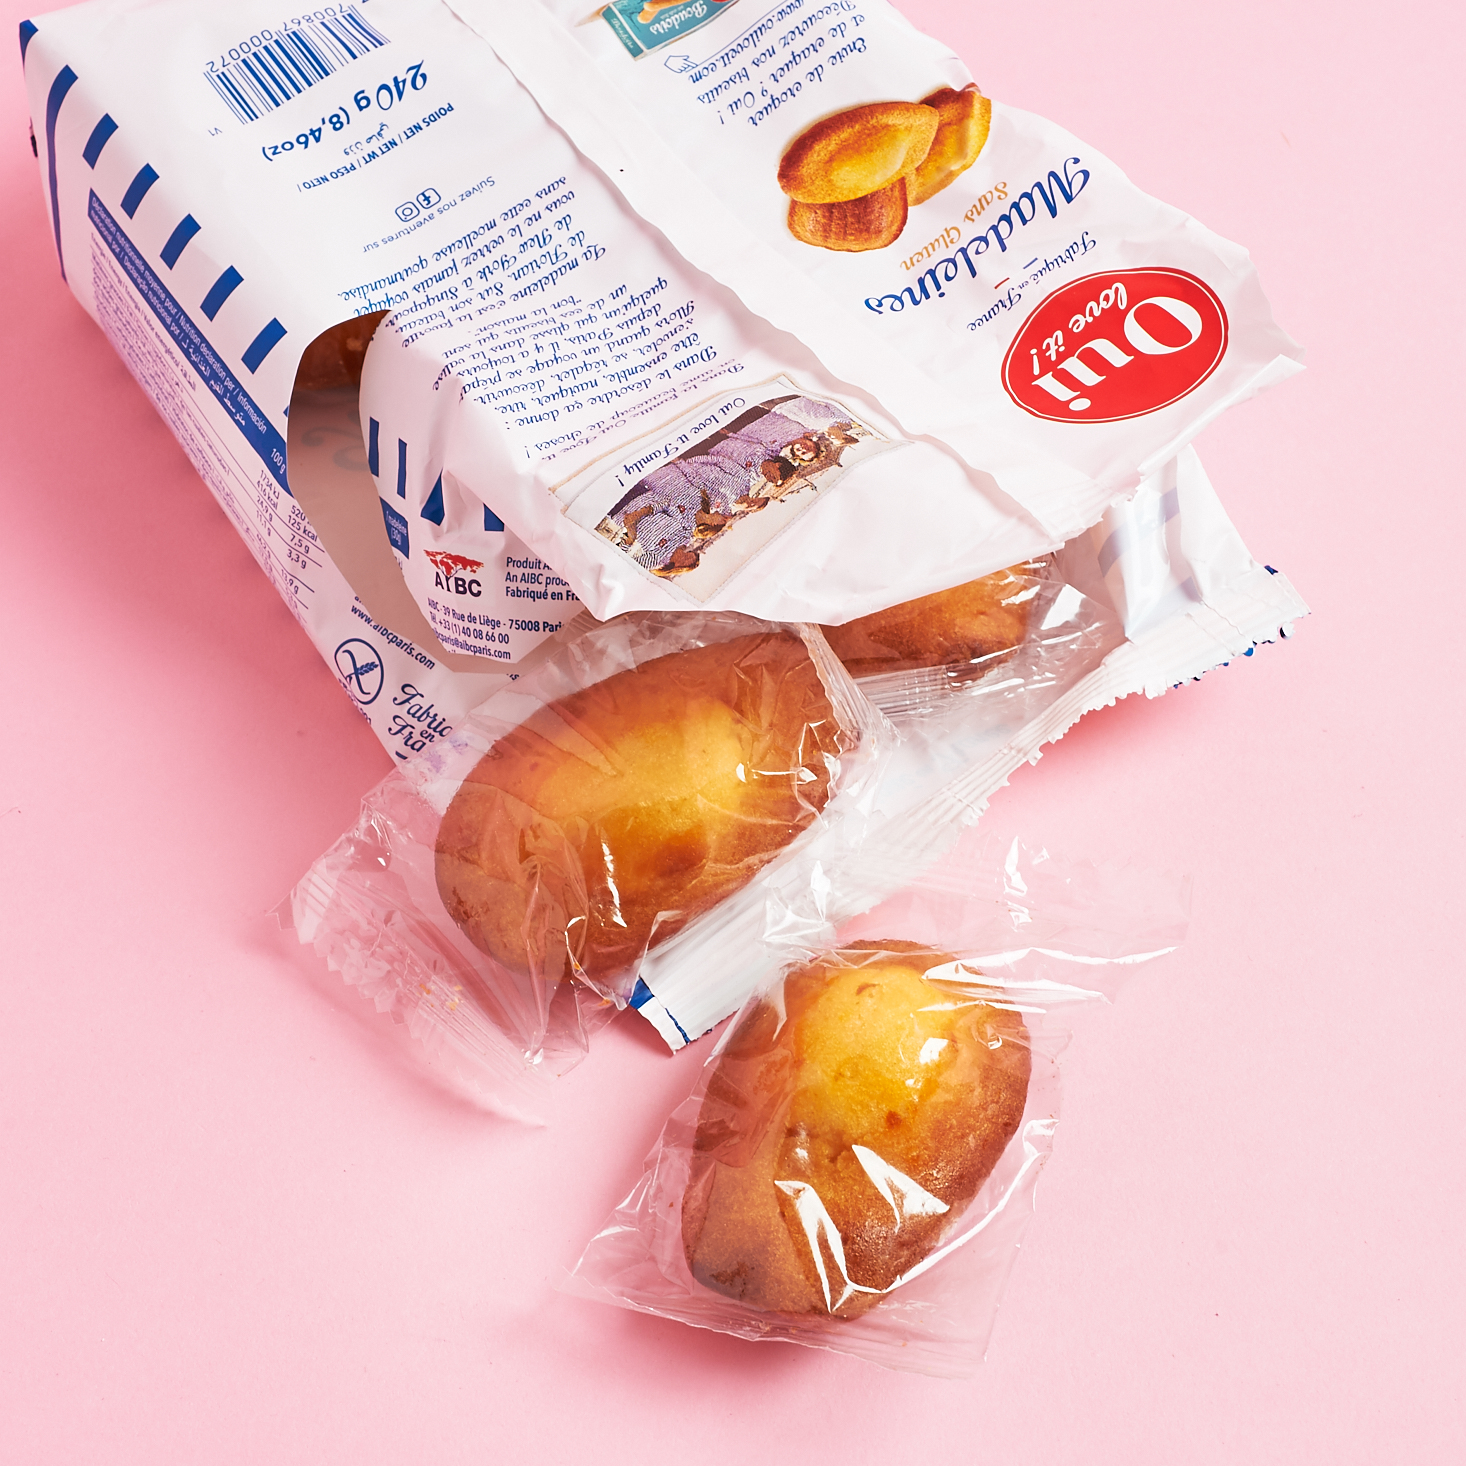 individually wrapped OUI LOVE IT CLASSIC MADELEINES coming out of bag